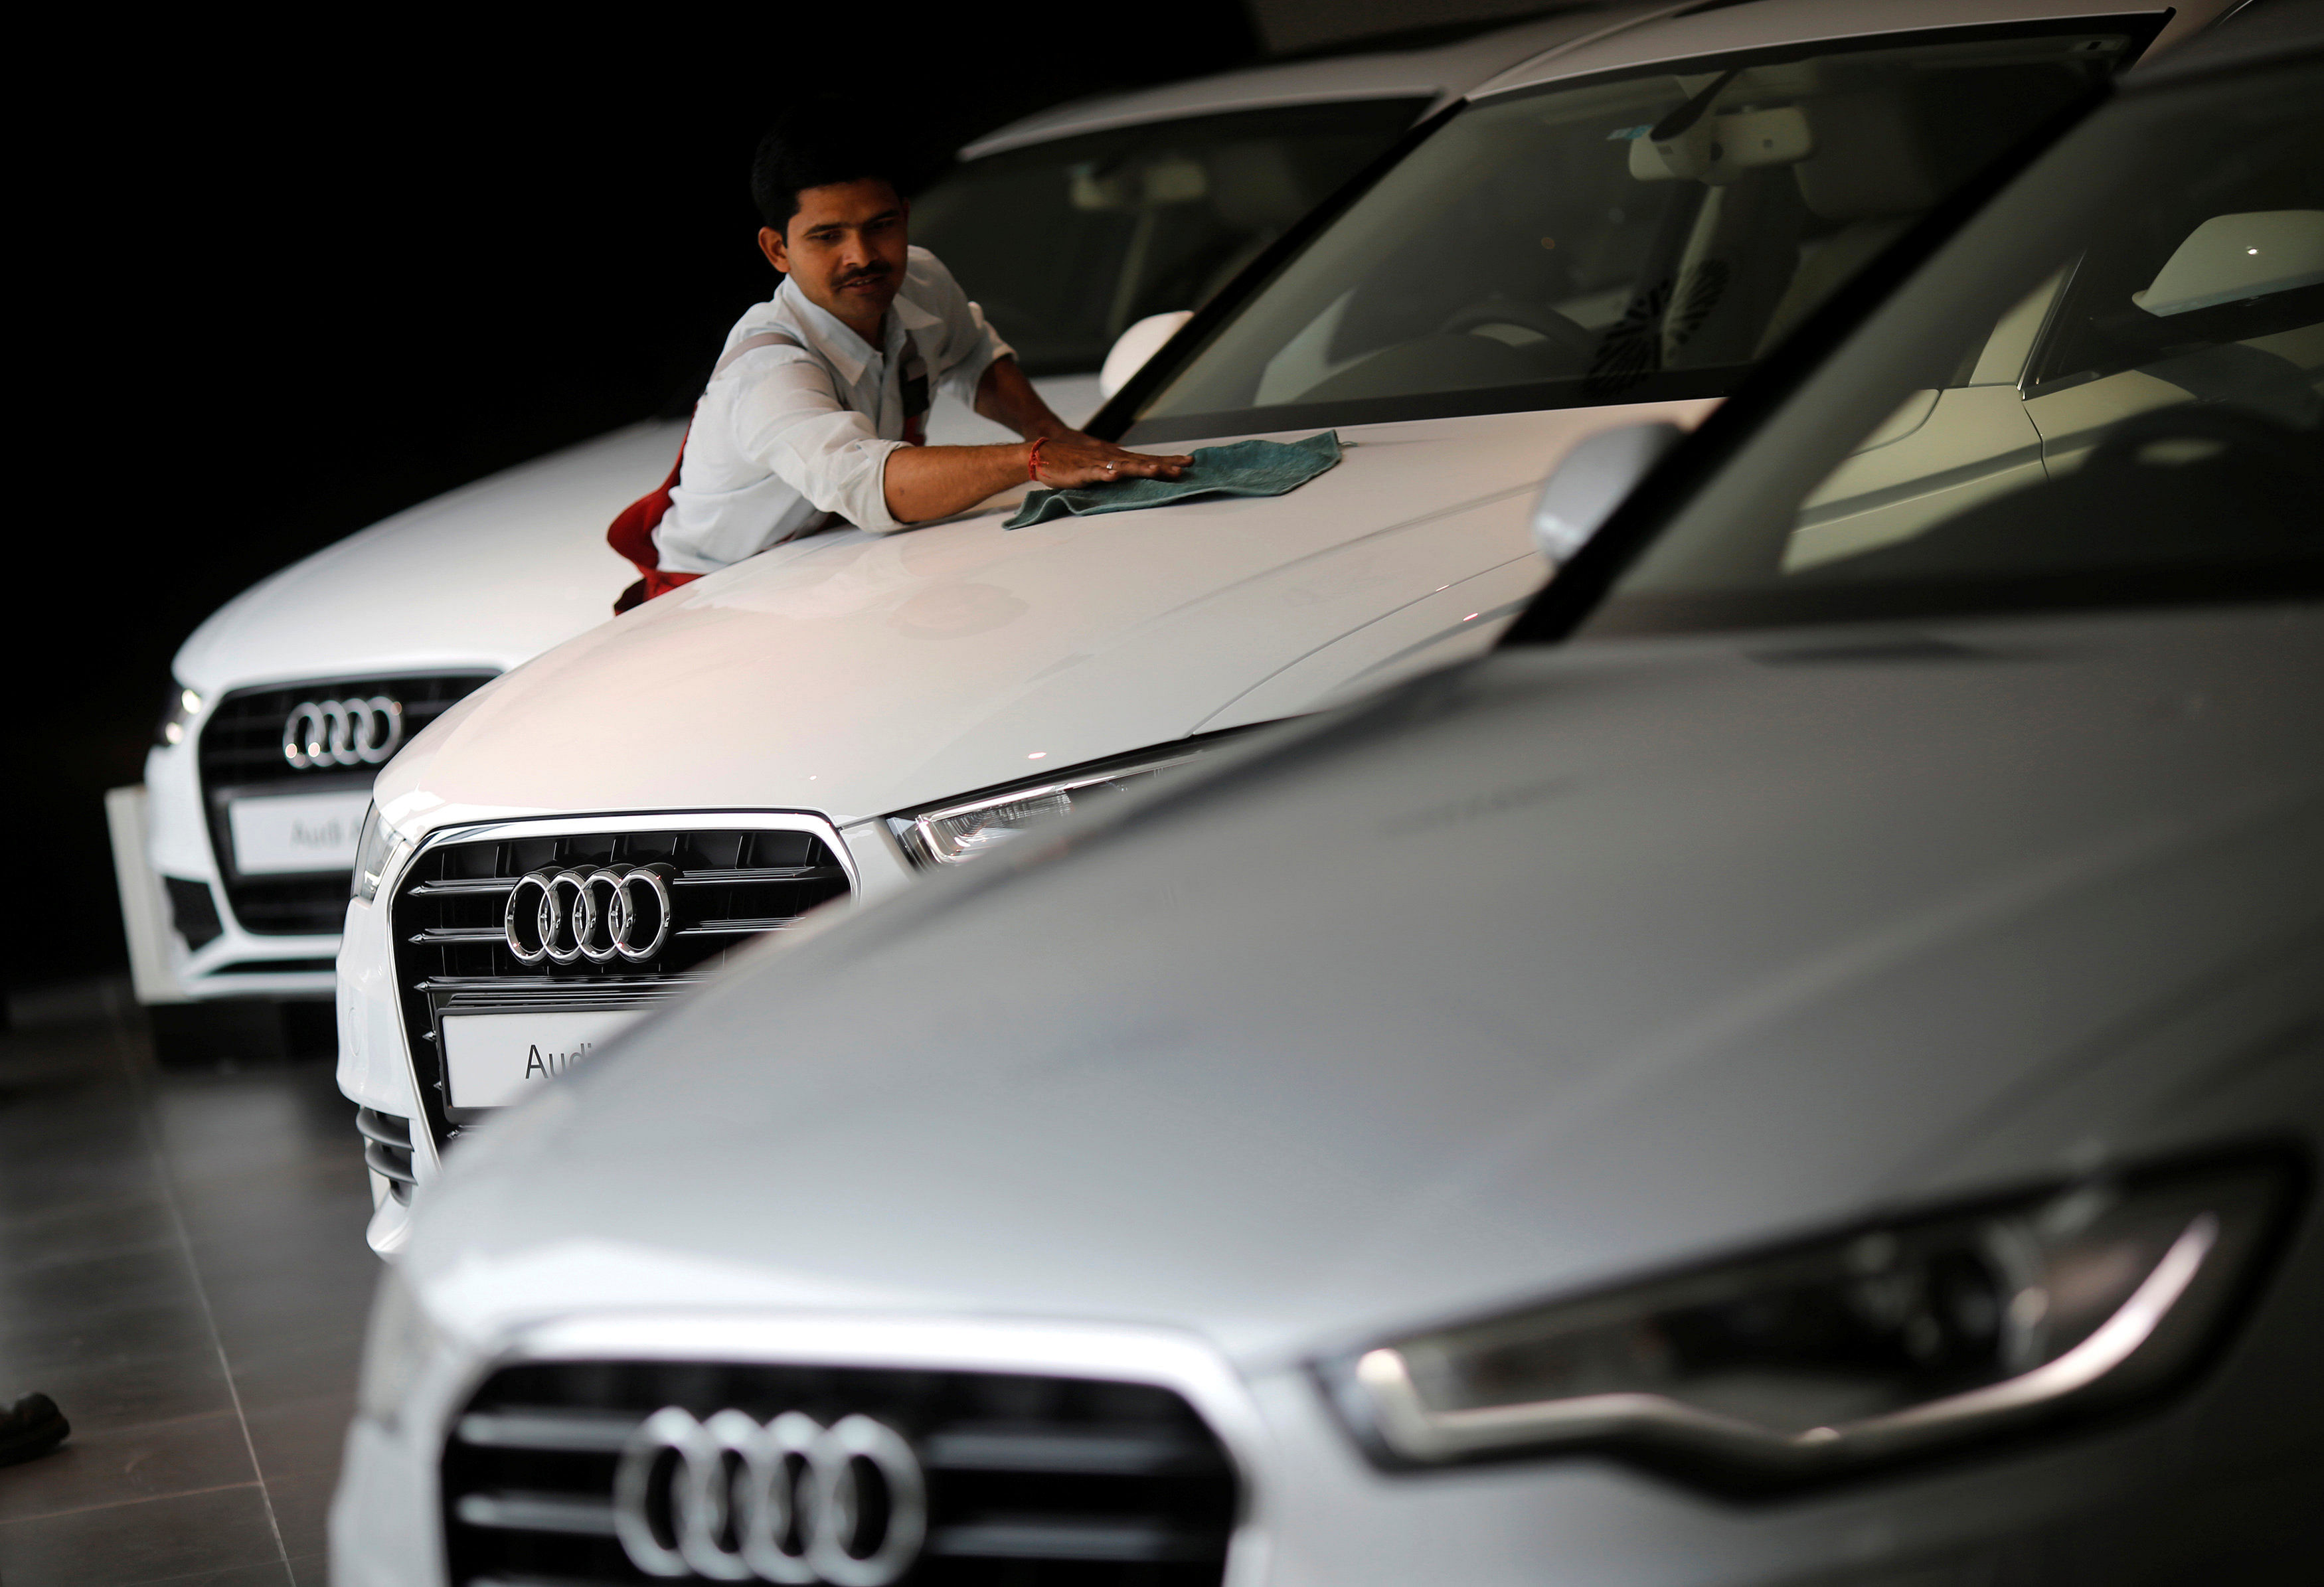 A worker cleans an Audi car on display at Audi's showroom in New Delhi. (Reuters file photo)